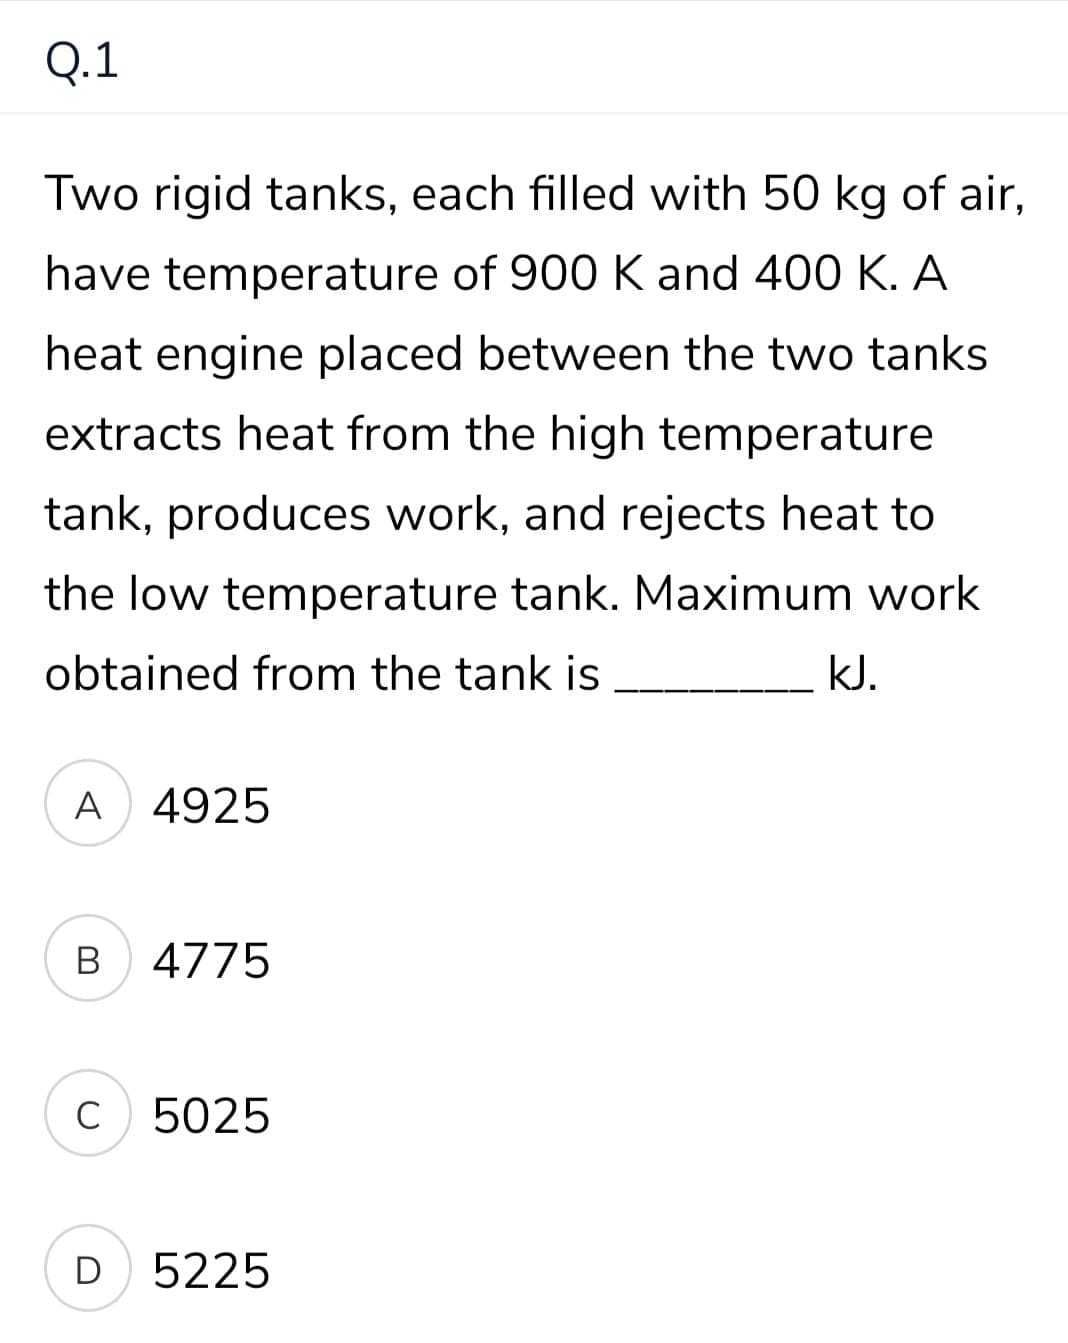 Q.1
Two rigid tanks, each filled with 50 kg of air,
have temperature of 900 K and 400 K. A
heat engine placed between the two tanks
extracts heat from the high temperature
tank, produces work, and rejects heat to
the low temperature tank. Maximum work
obtained from the tank is
kJ.
A 4925
В
4775
C
5025
D
5225
